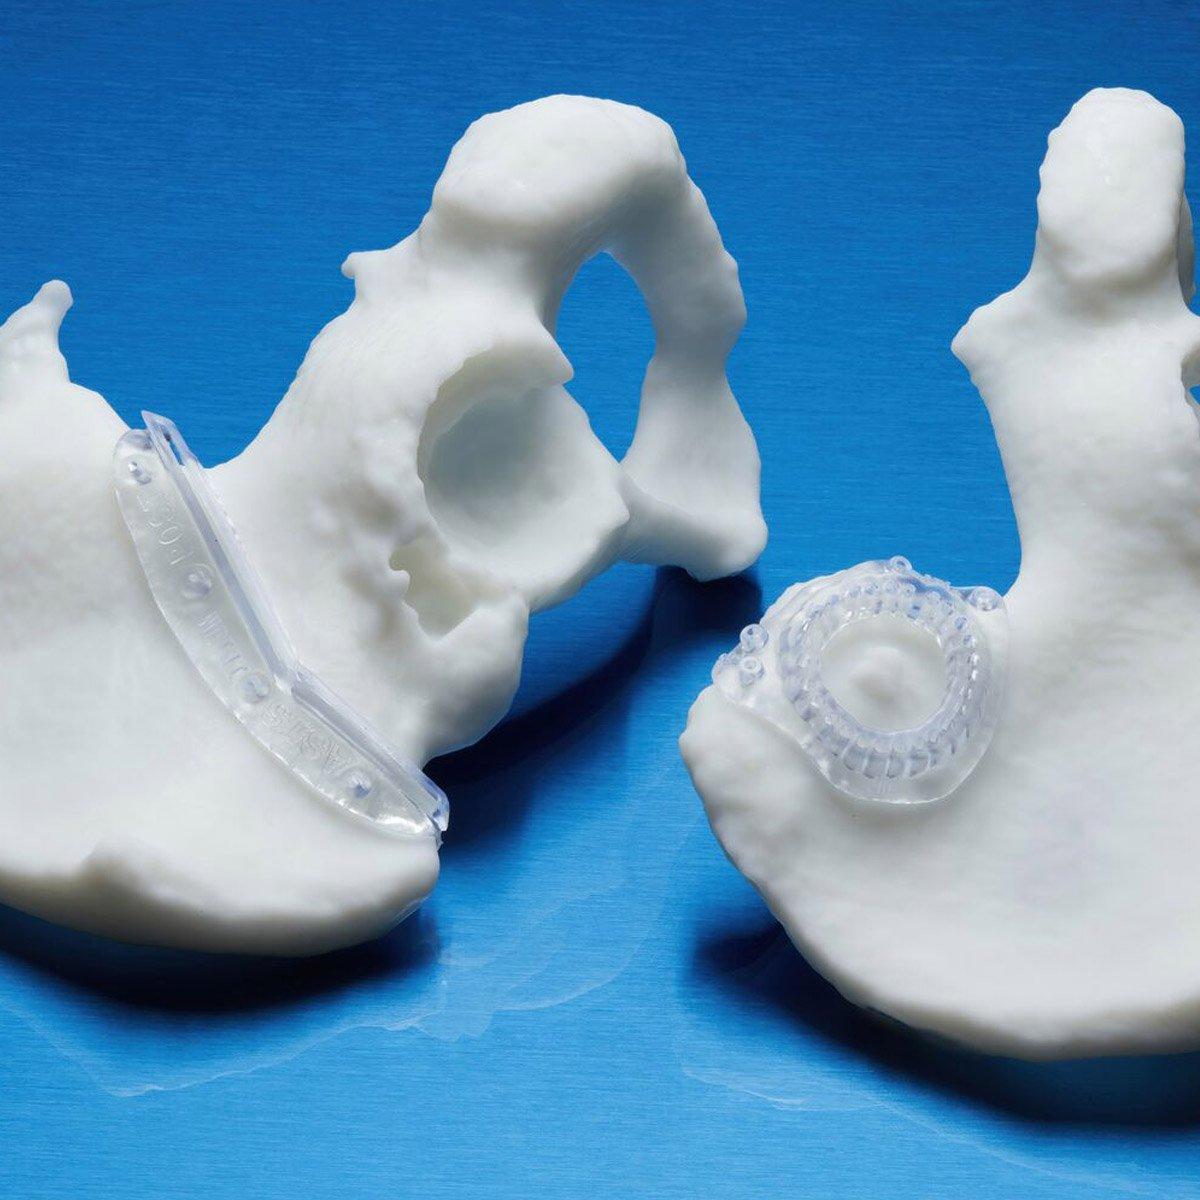 surgical guides printed in BioMed Durable Resin